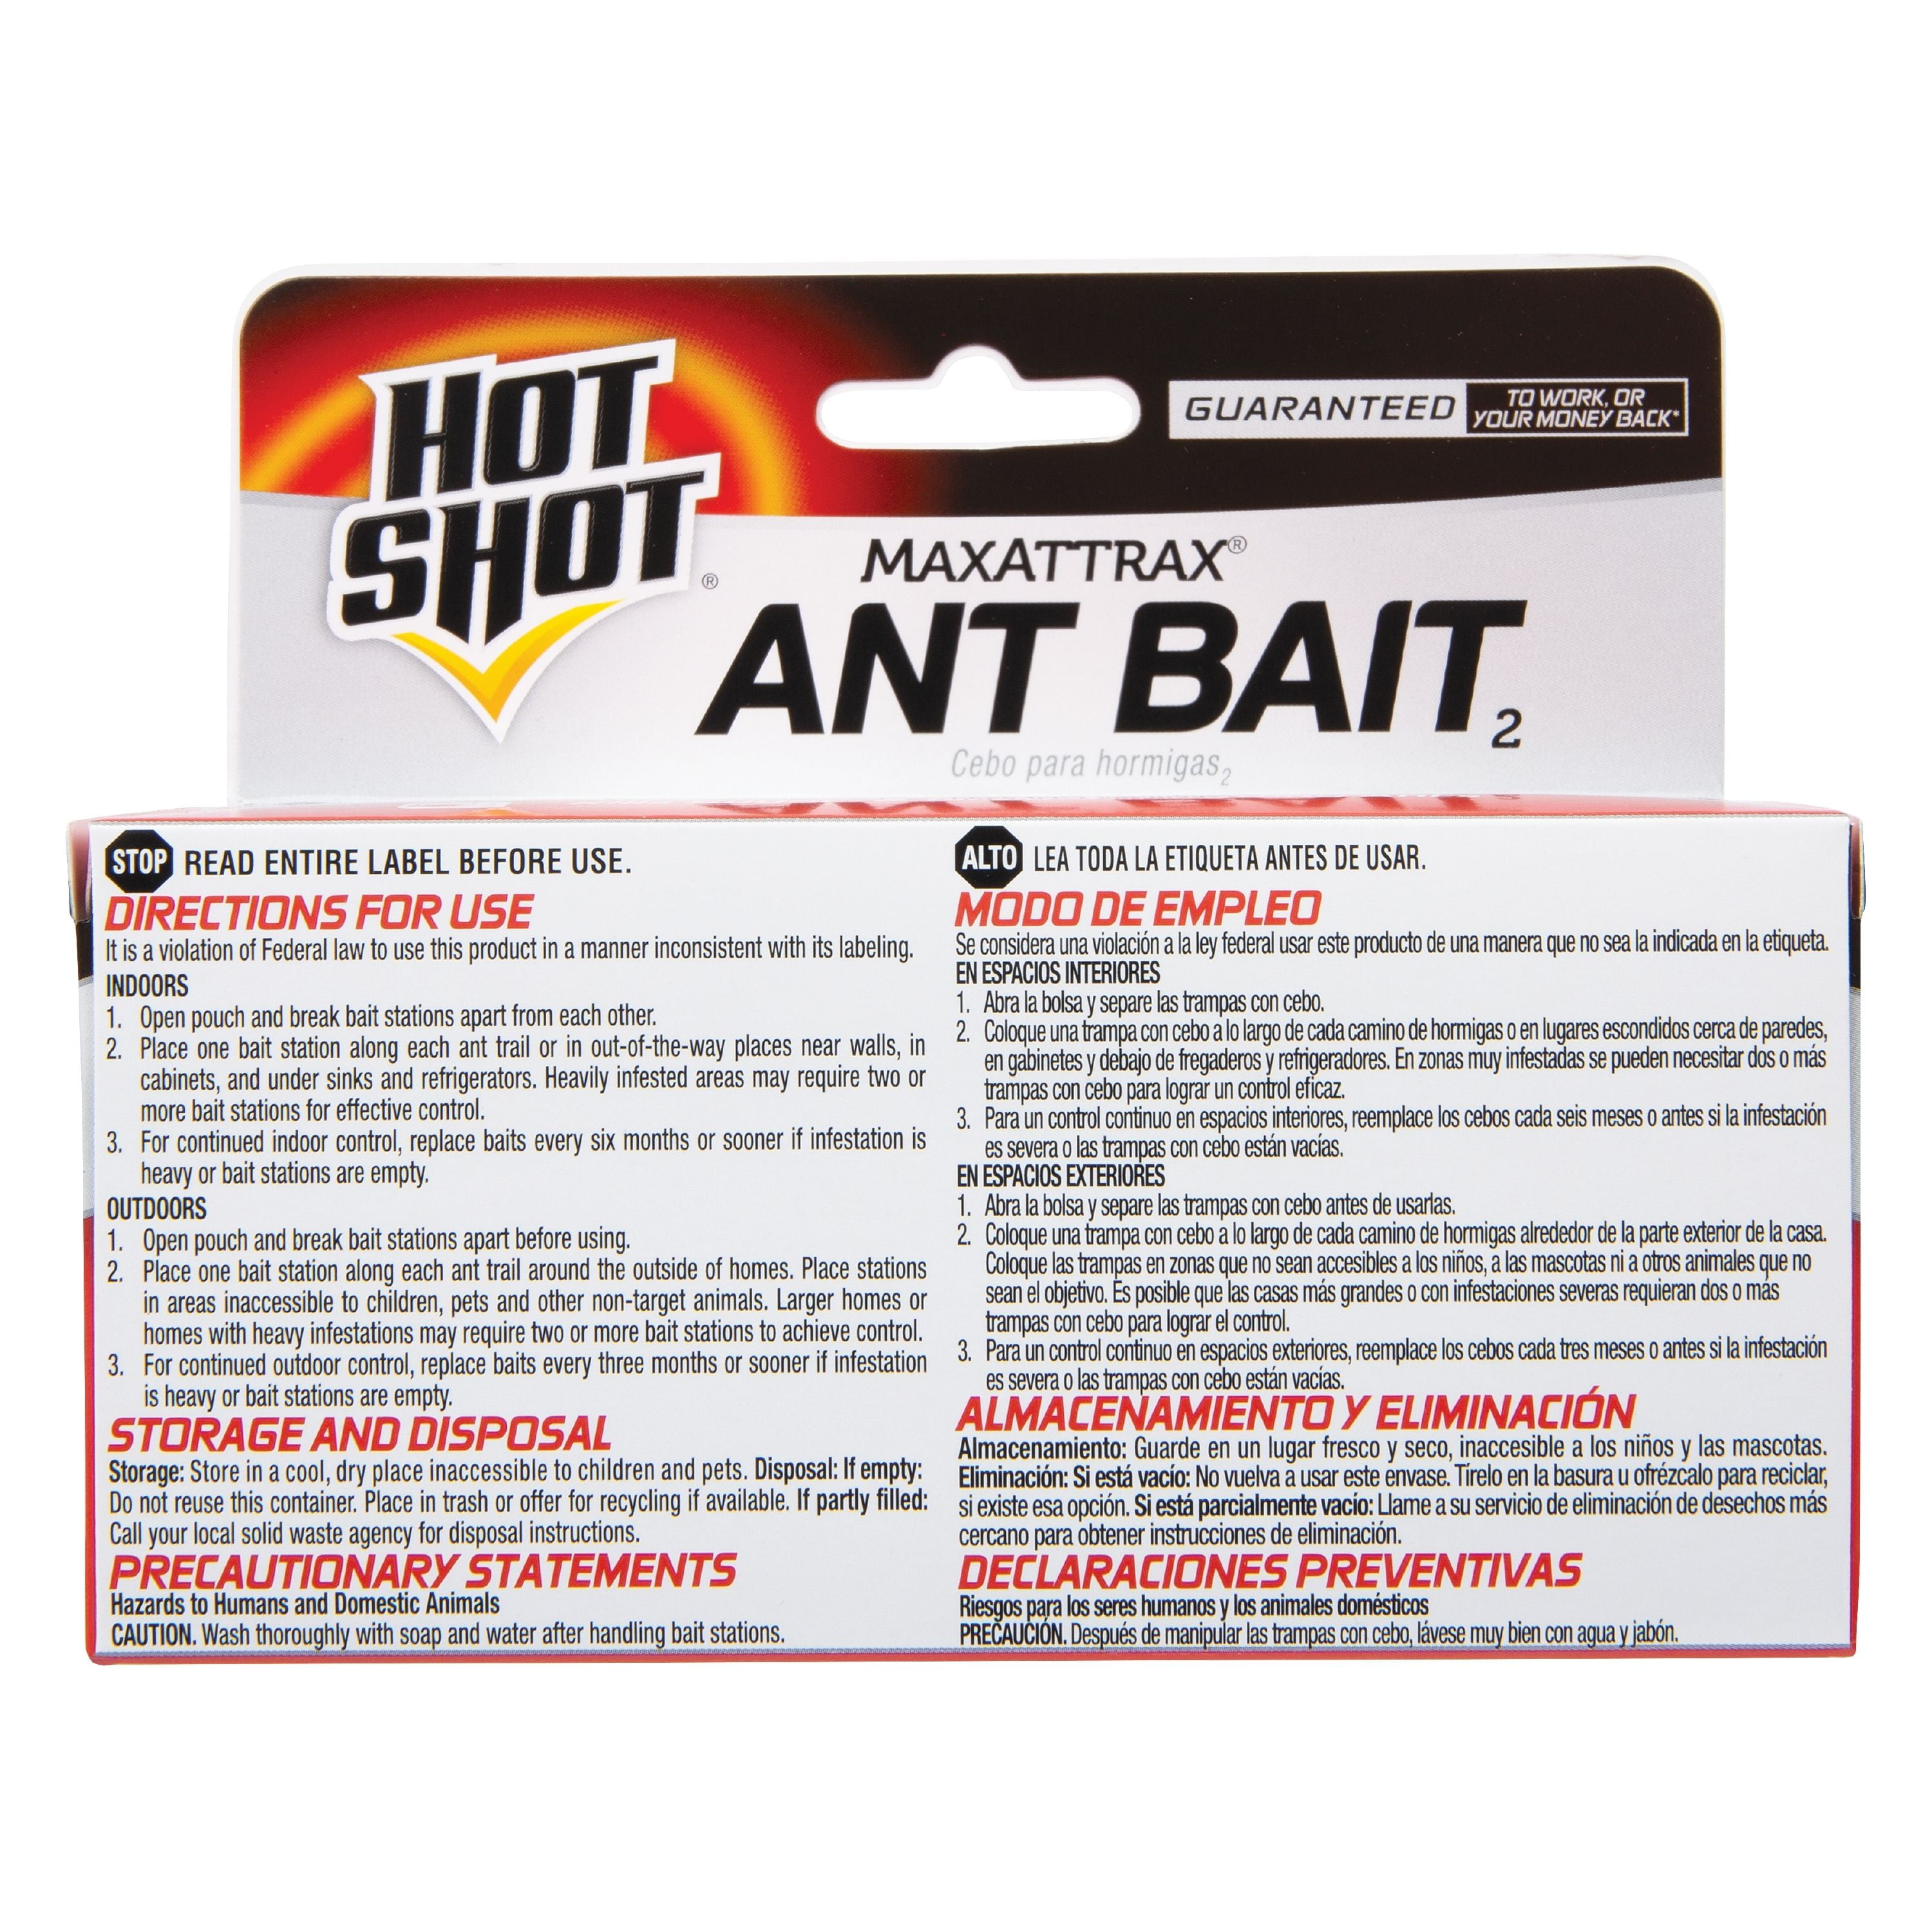 Hot Shot MaxAttrax Ant Bait Child-Resistant Stations, 8-Count